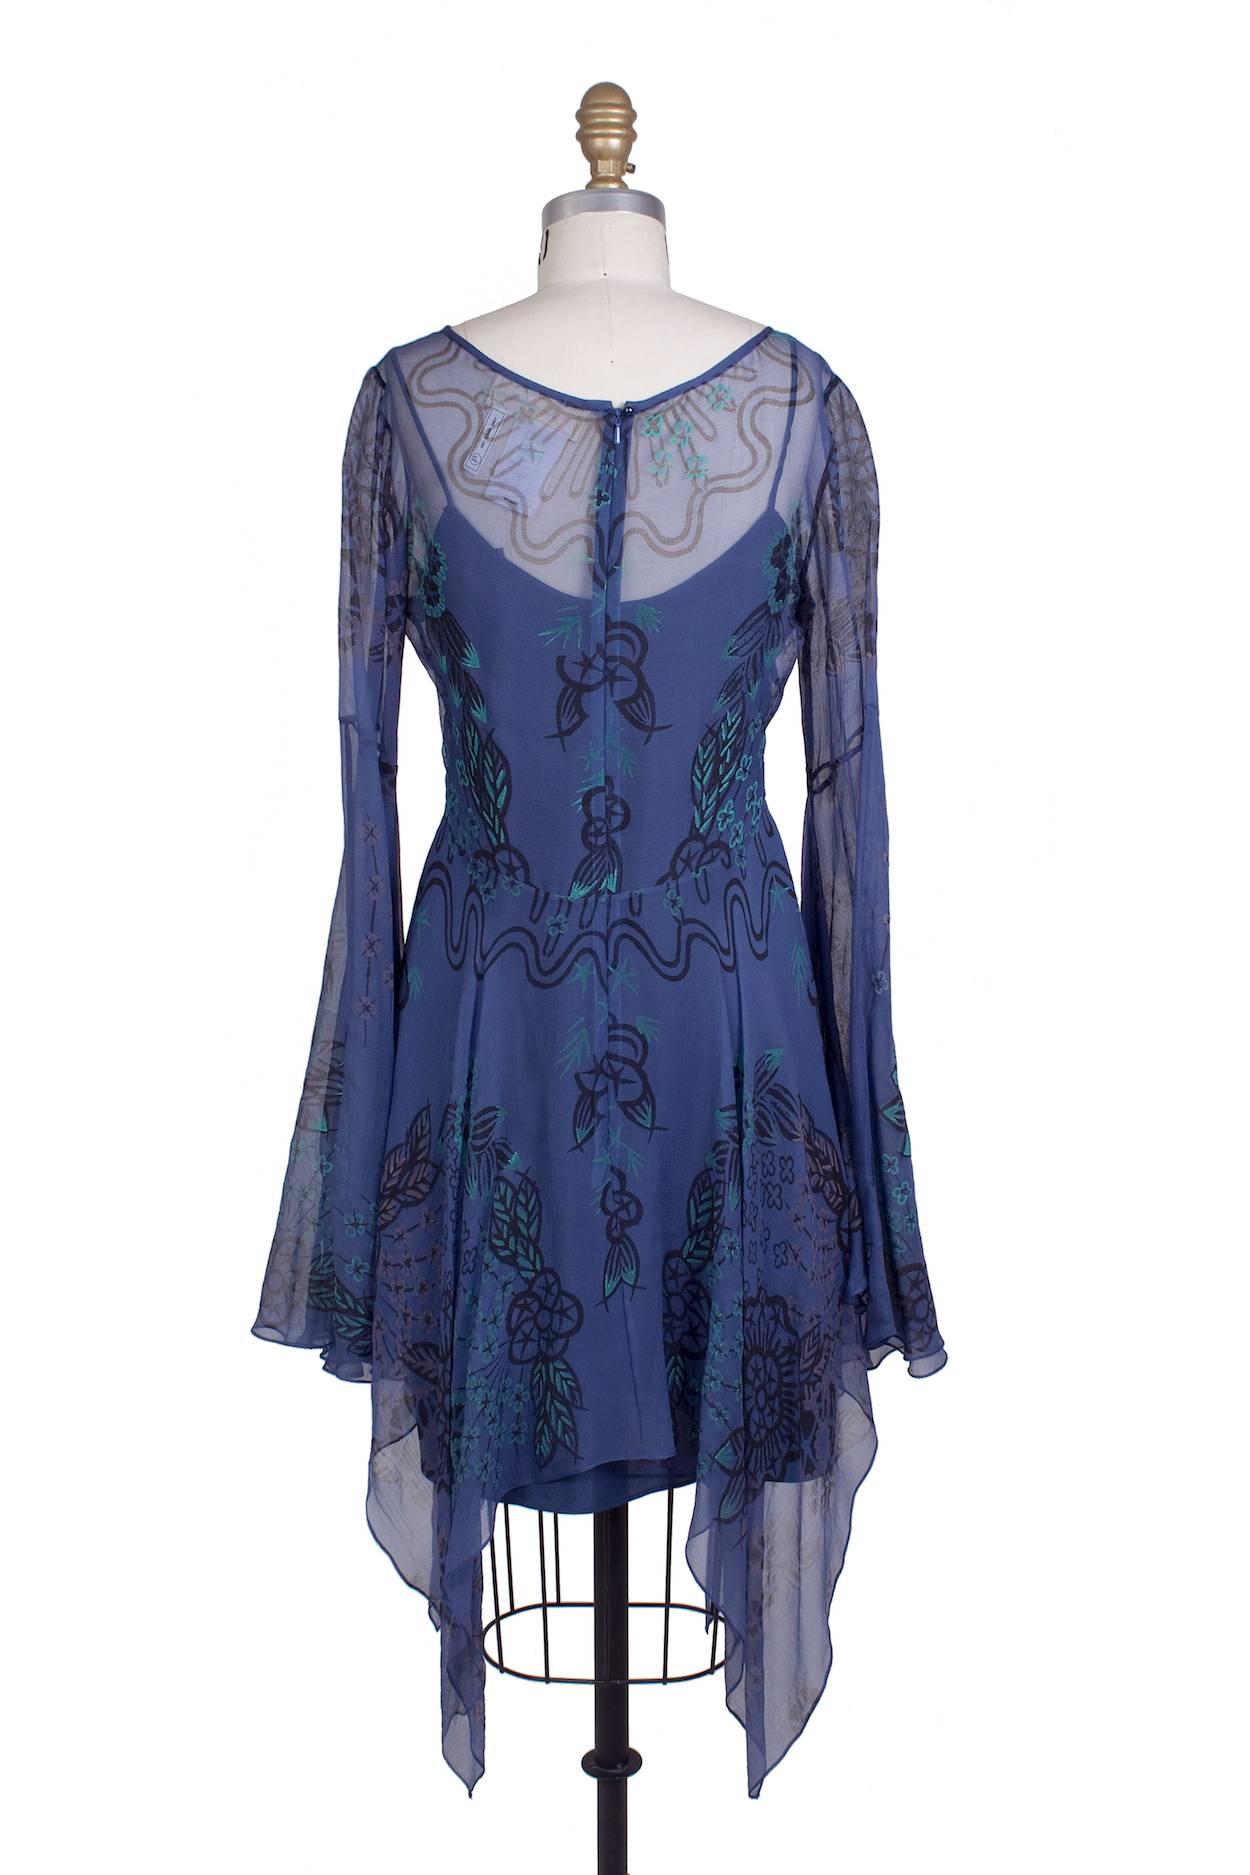 This is a sheer silk dress by Zandra Rhodes c. 1970s.  It features a floral print and bell sleeves.  Includes a separate slip.

15